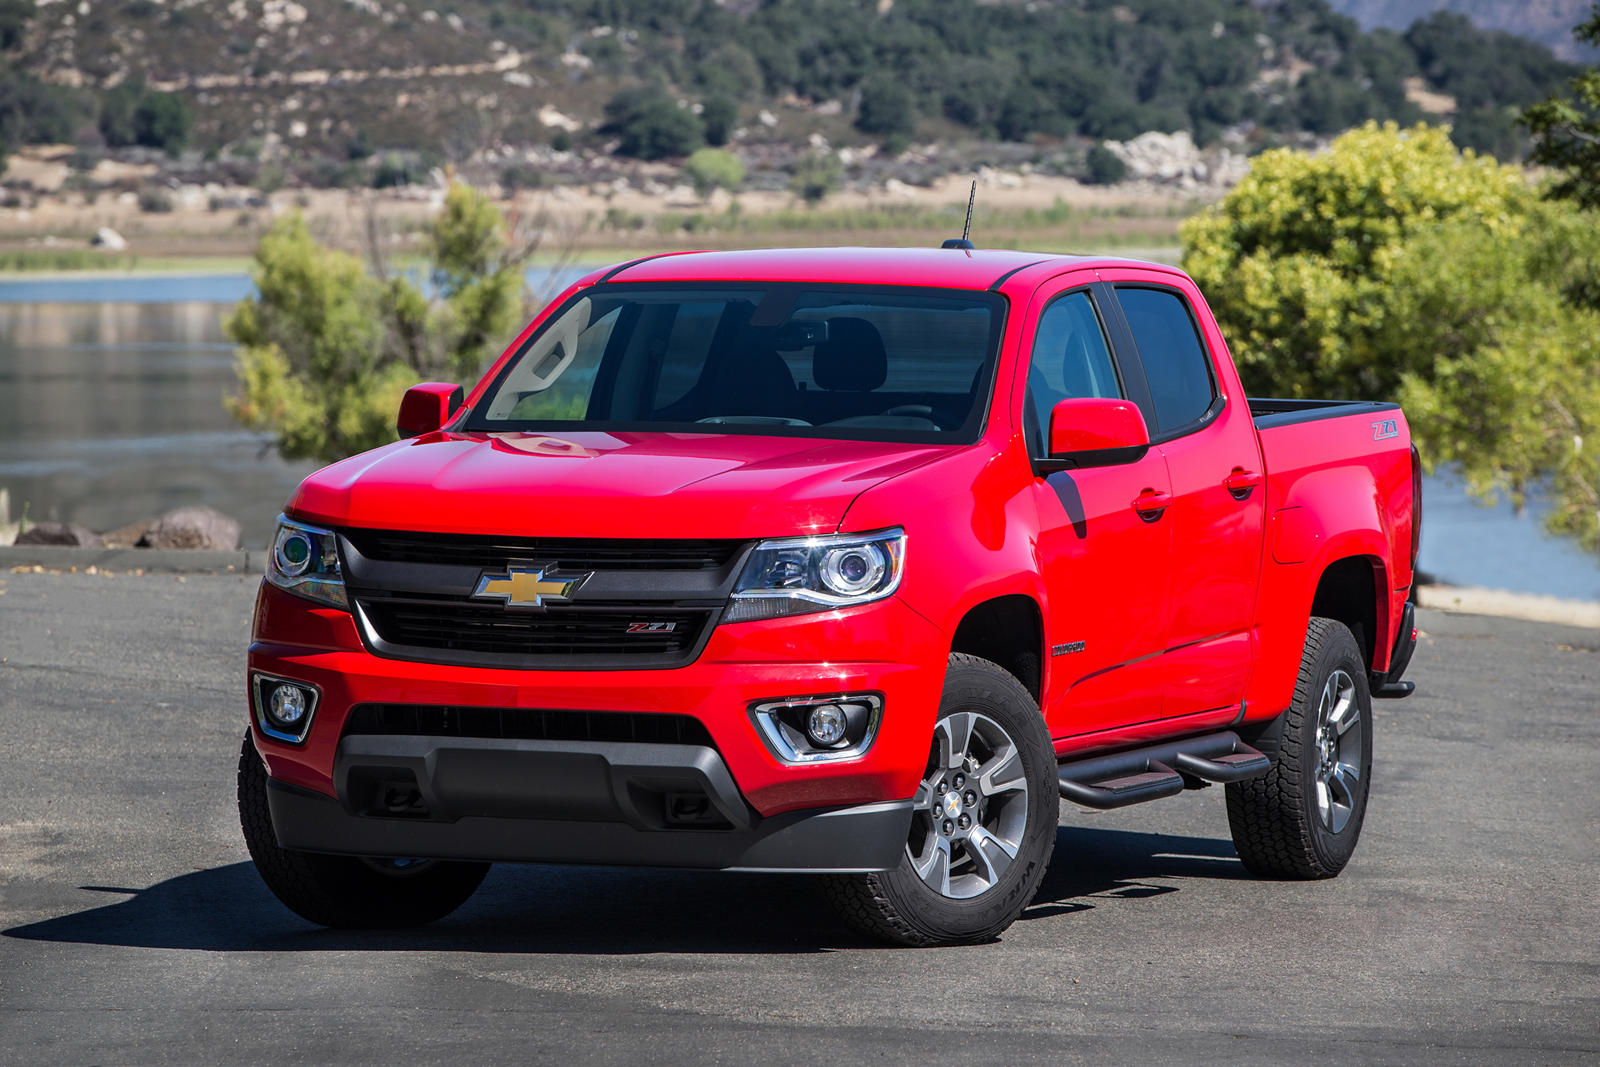 2020 Chevrolet Colorado Front Angle View